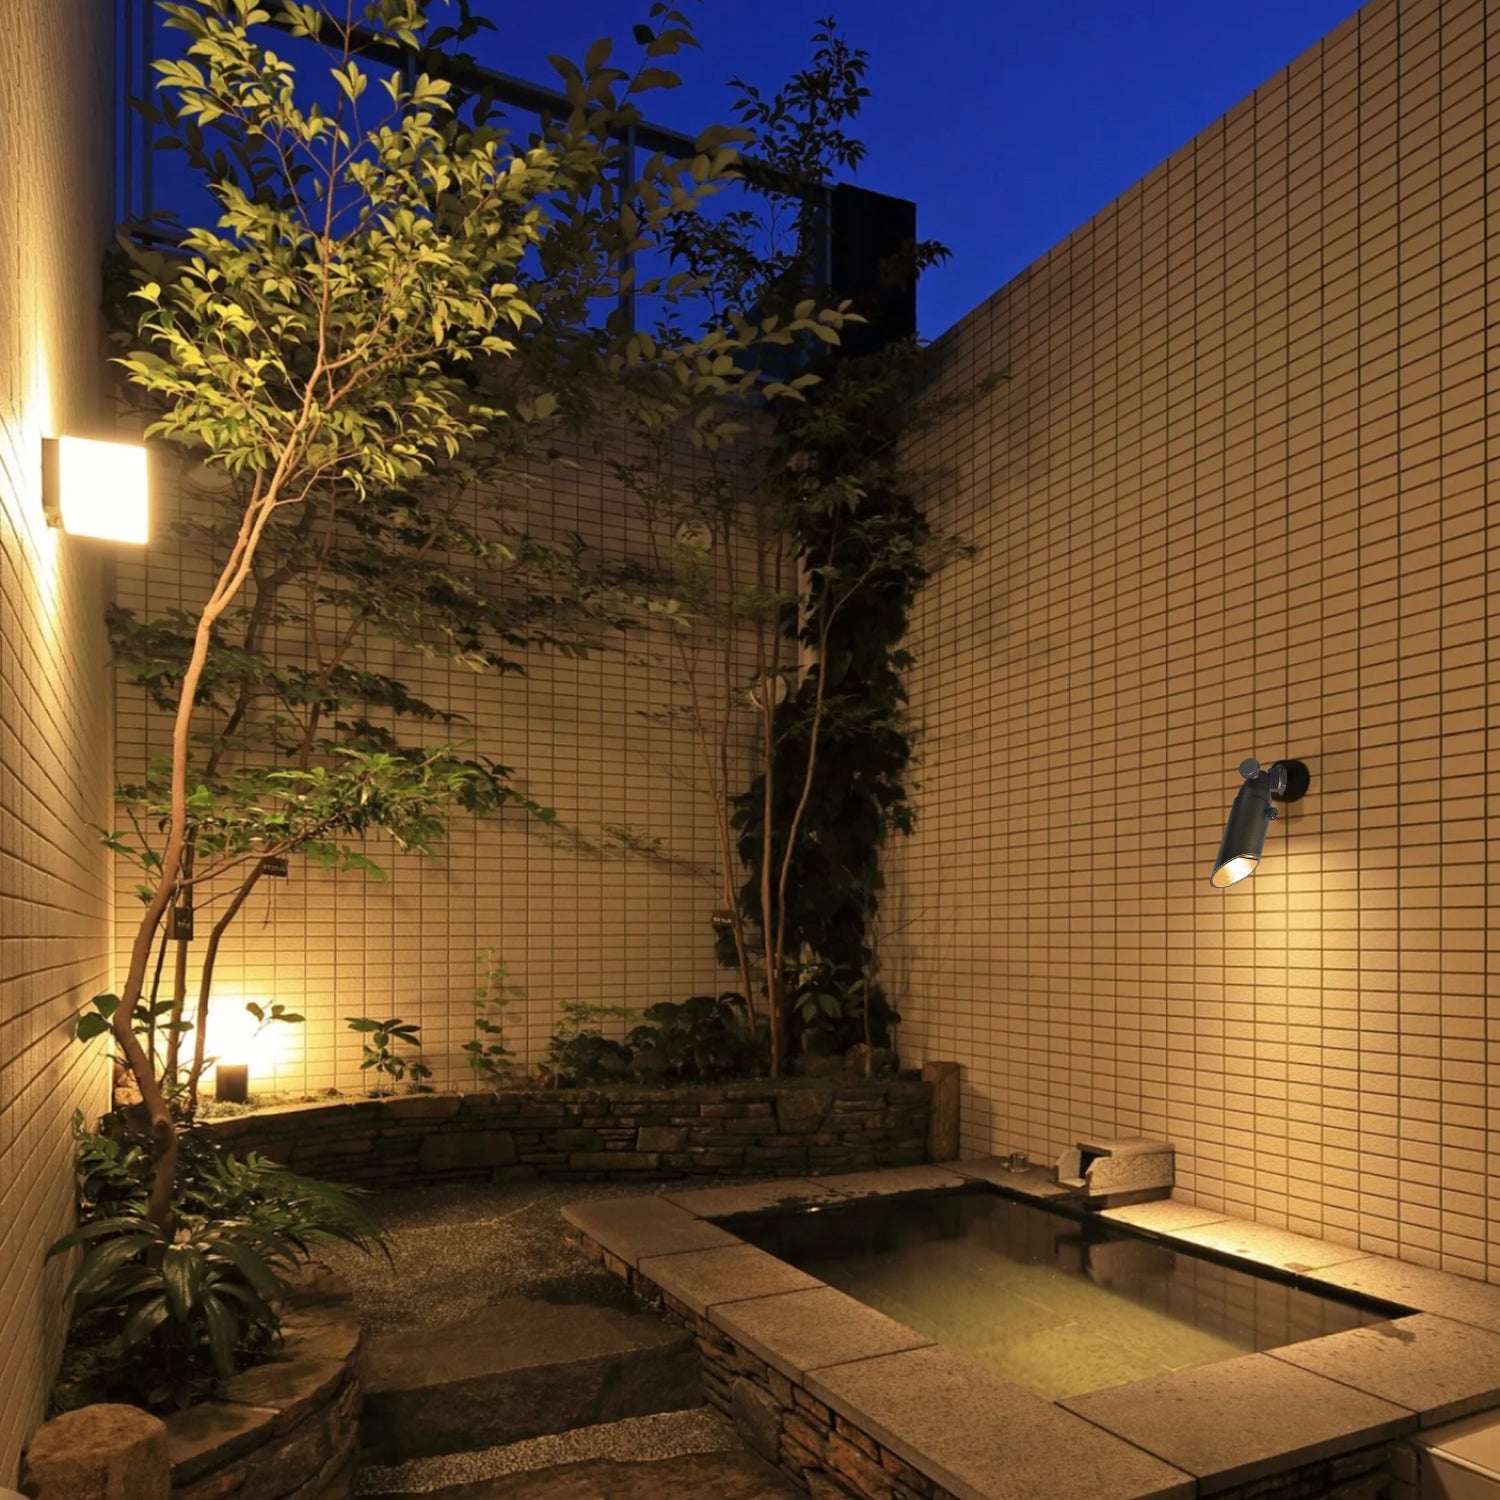 Outdoor garden at night illuminated by wall-mounted lights and a mini brass low voltage spotlight, highlighting tiled walls, plants, and a small garden area with trees.